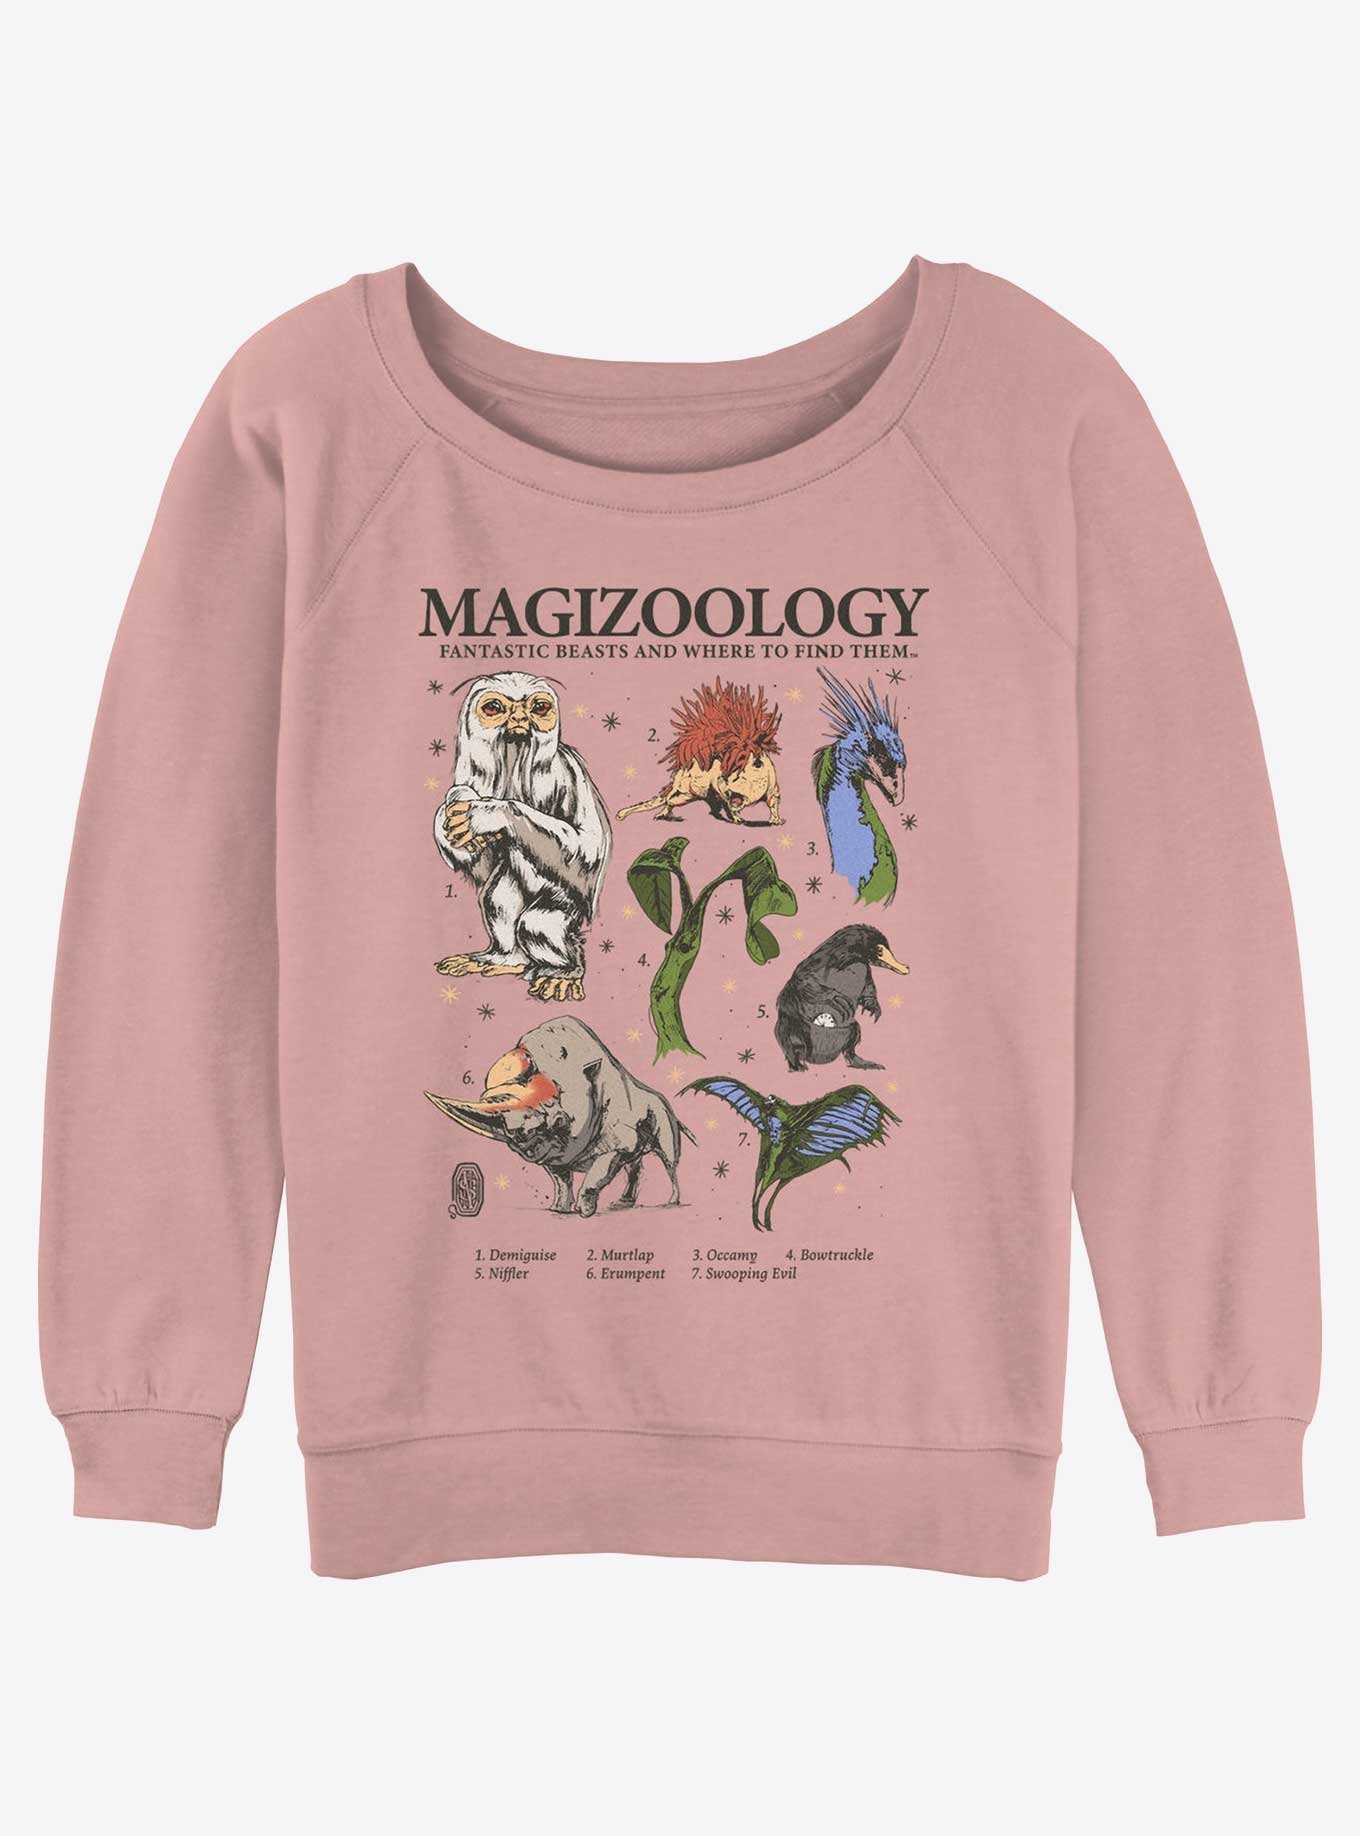 Fantastic Beasts and Where to Find Them Magizoology Womens Slouchy Sweatshirt, , hi-res